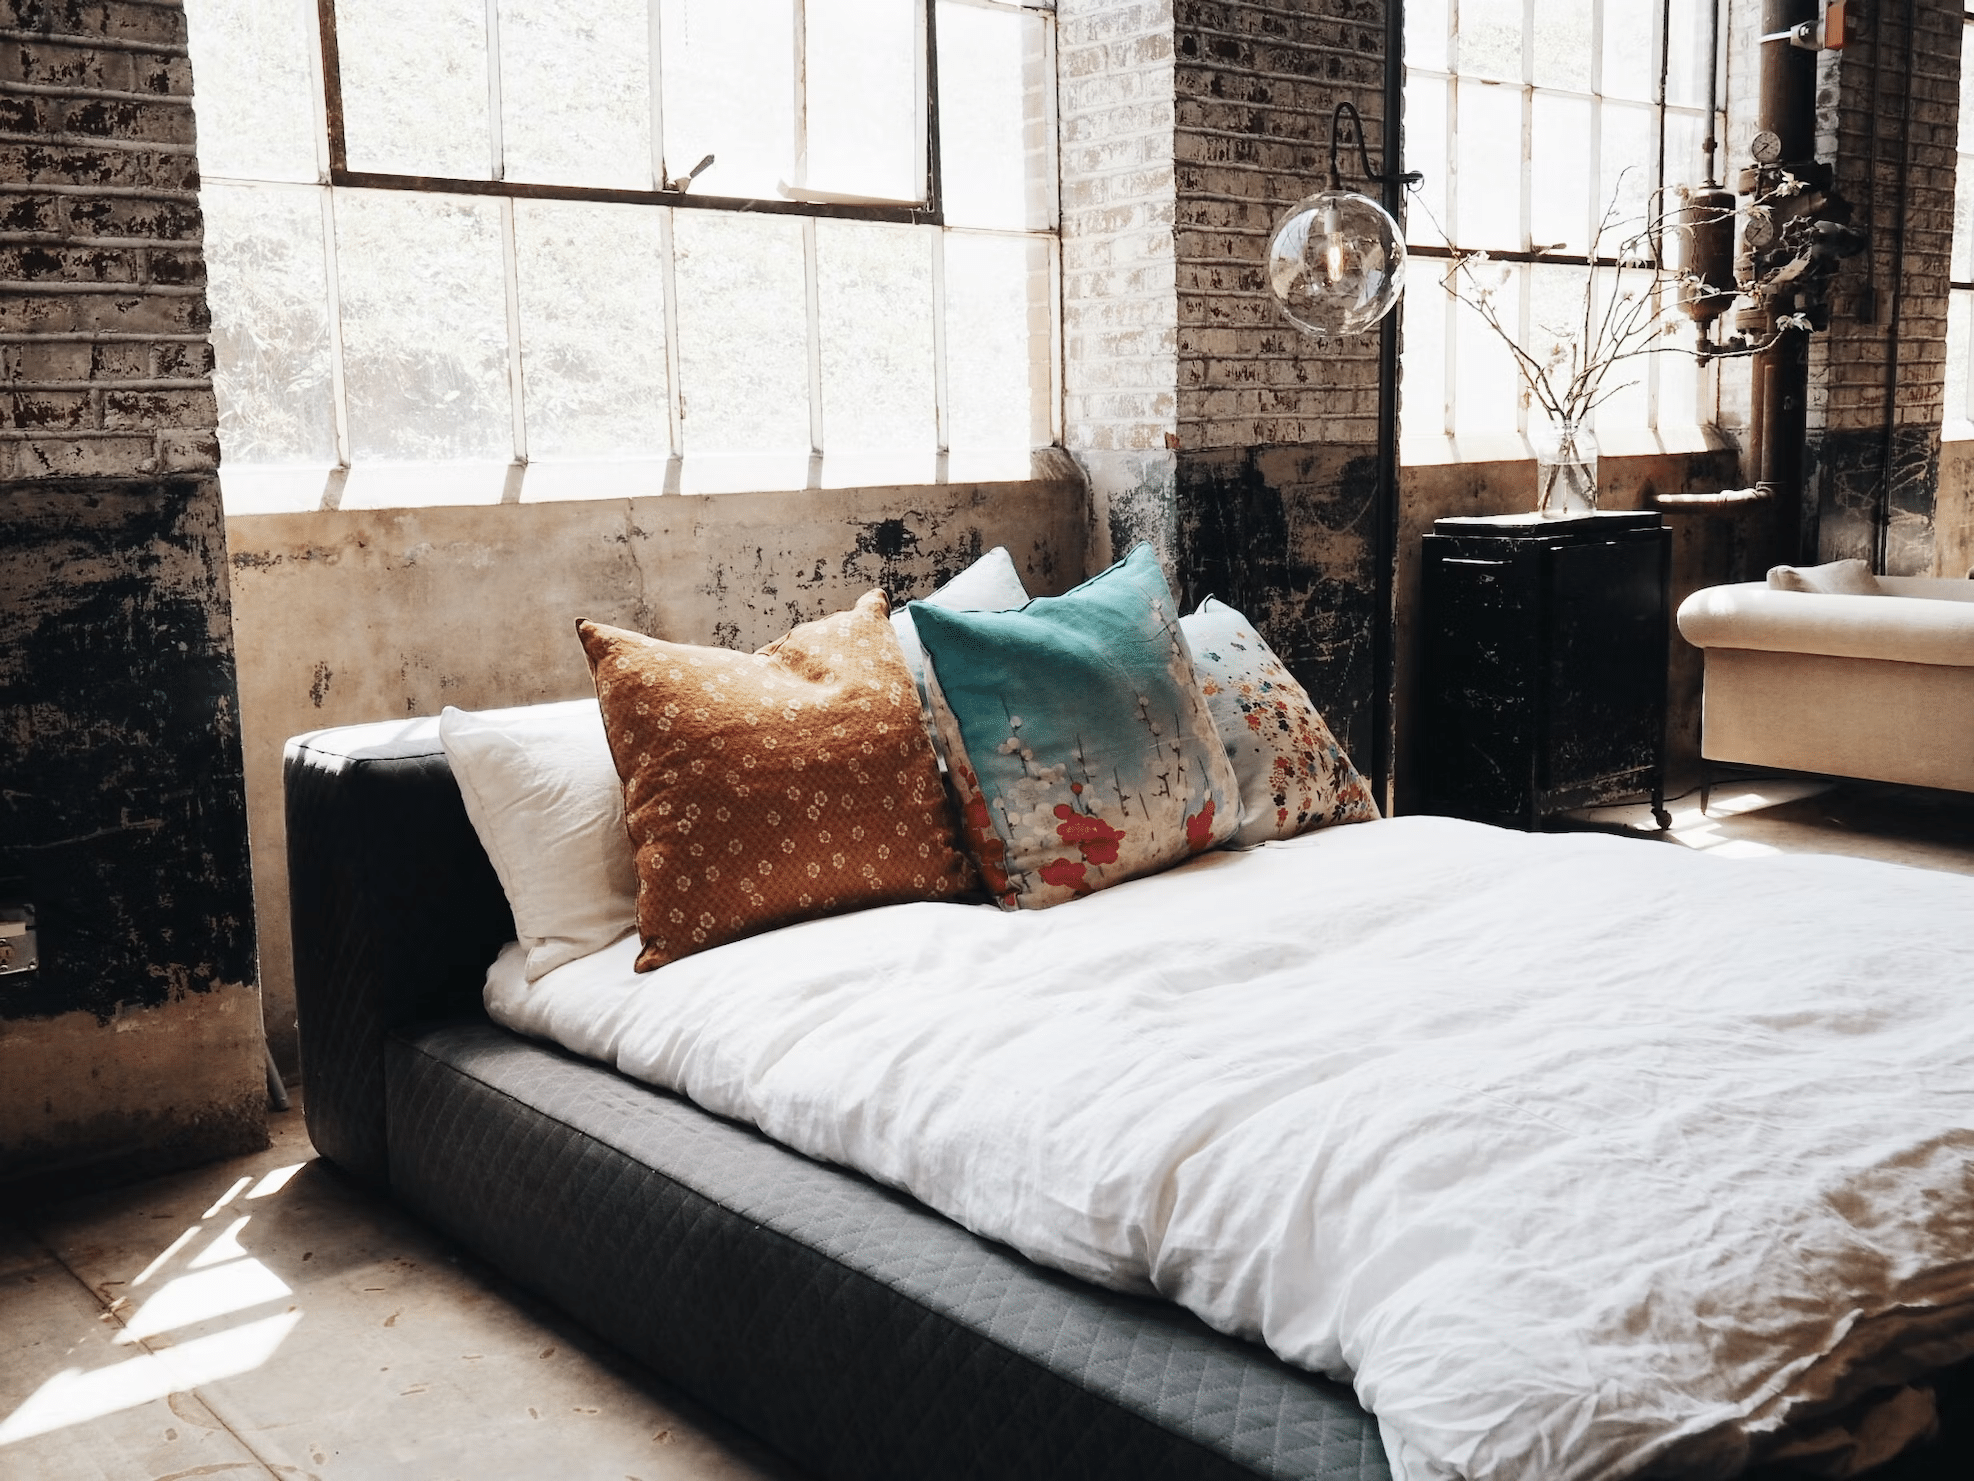 How to Create an Industrial Style Room Design for a Teenage Girl?